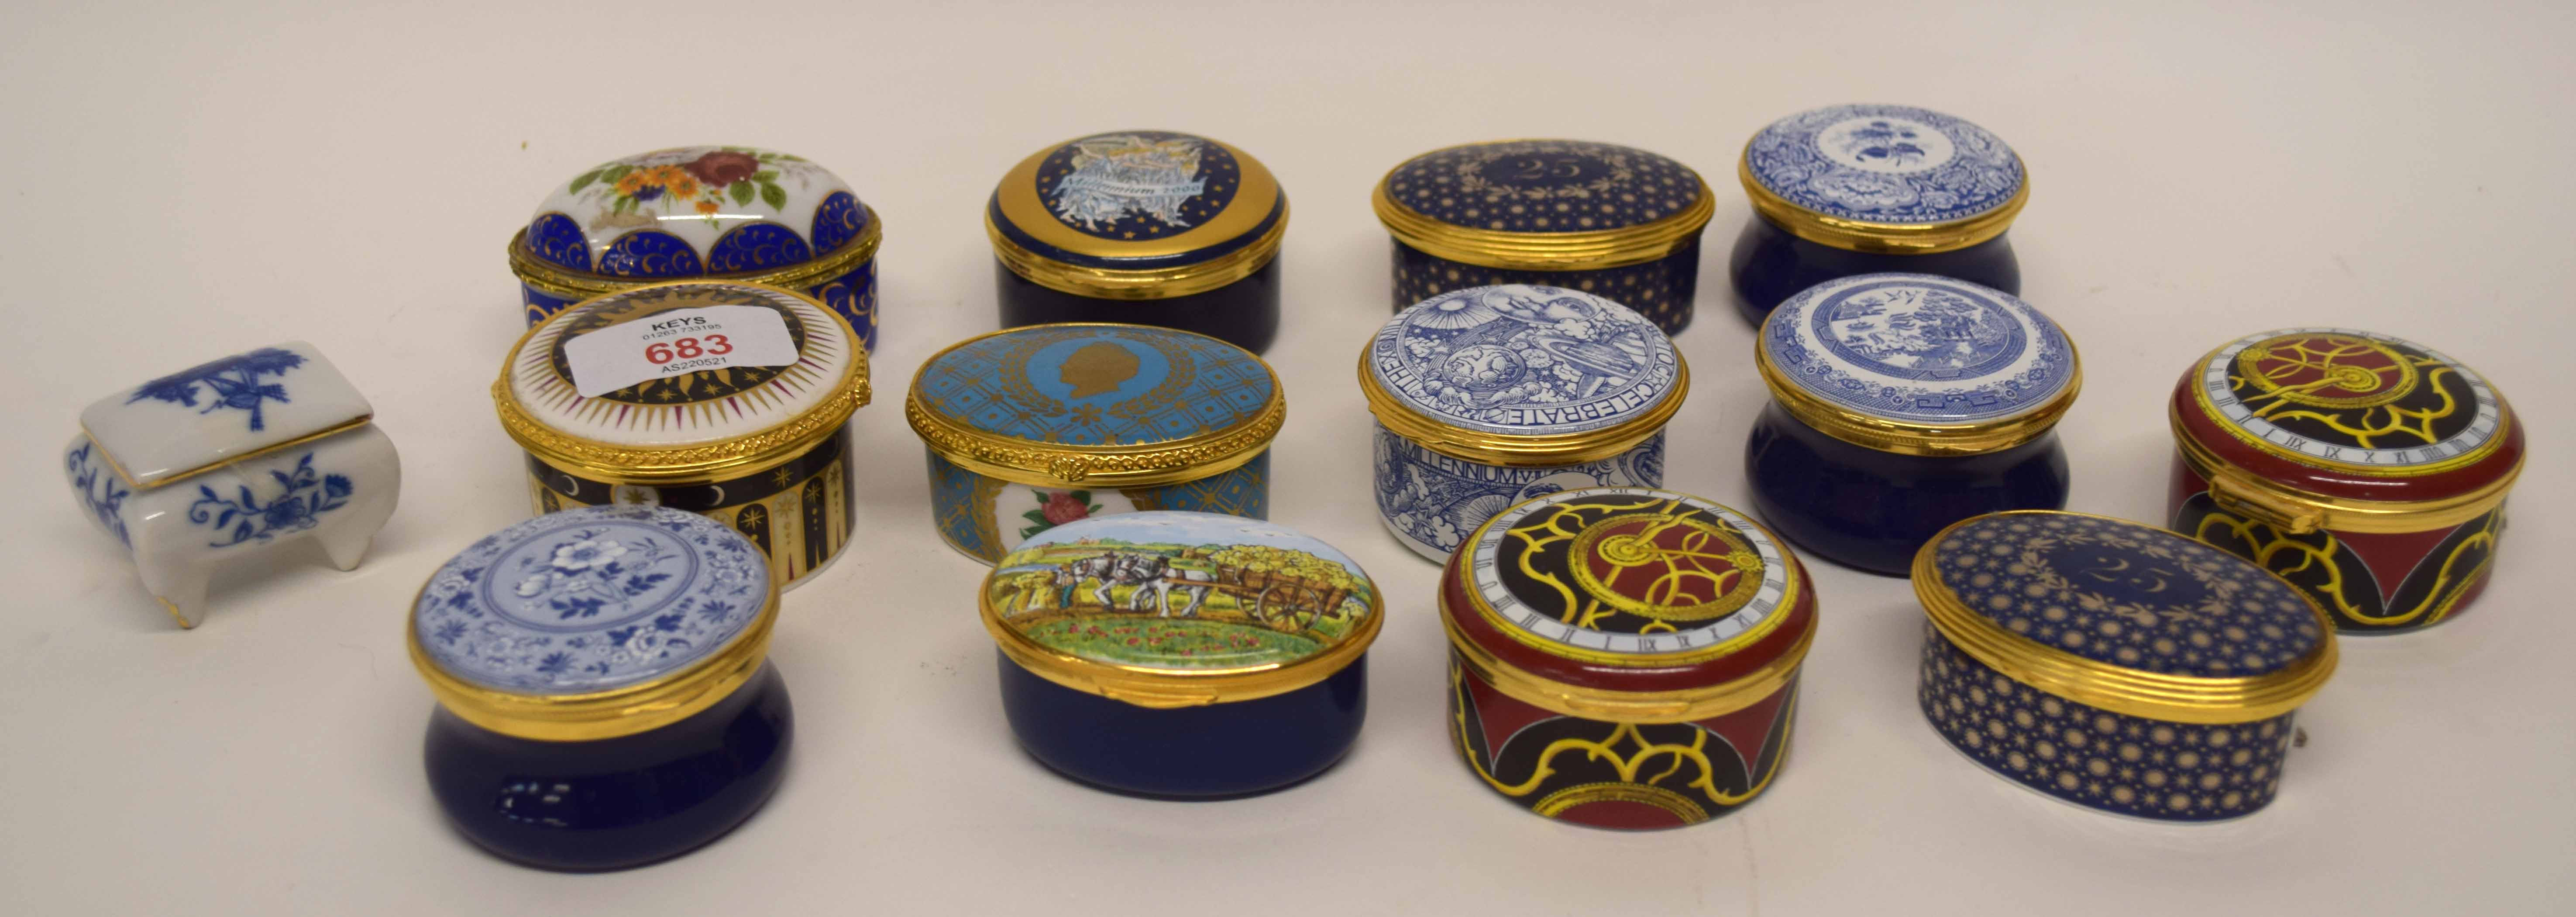 Group of 14 patch boxes, some by Spode and other makers, mainly English and French, some also - Image 2 of 2